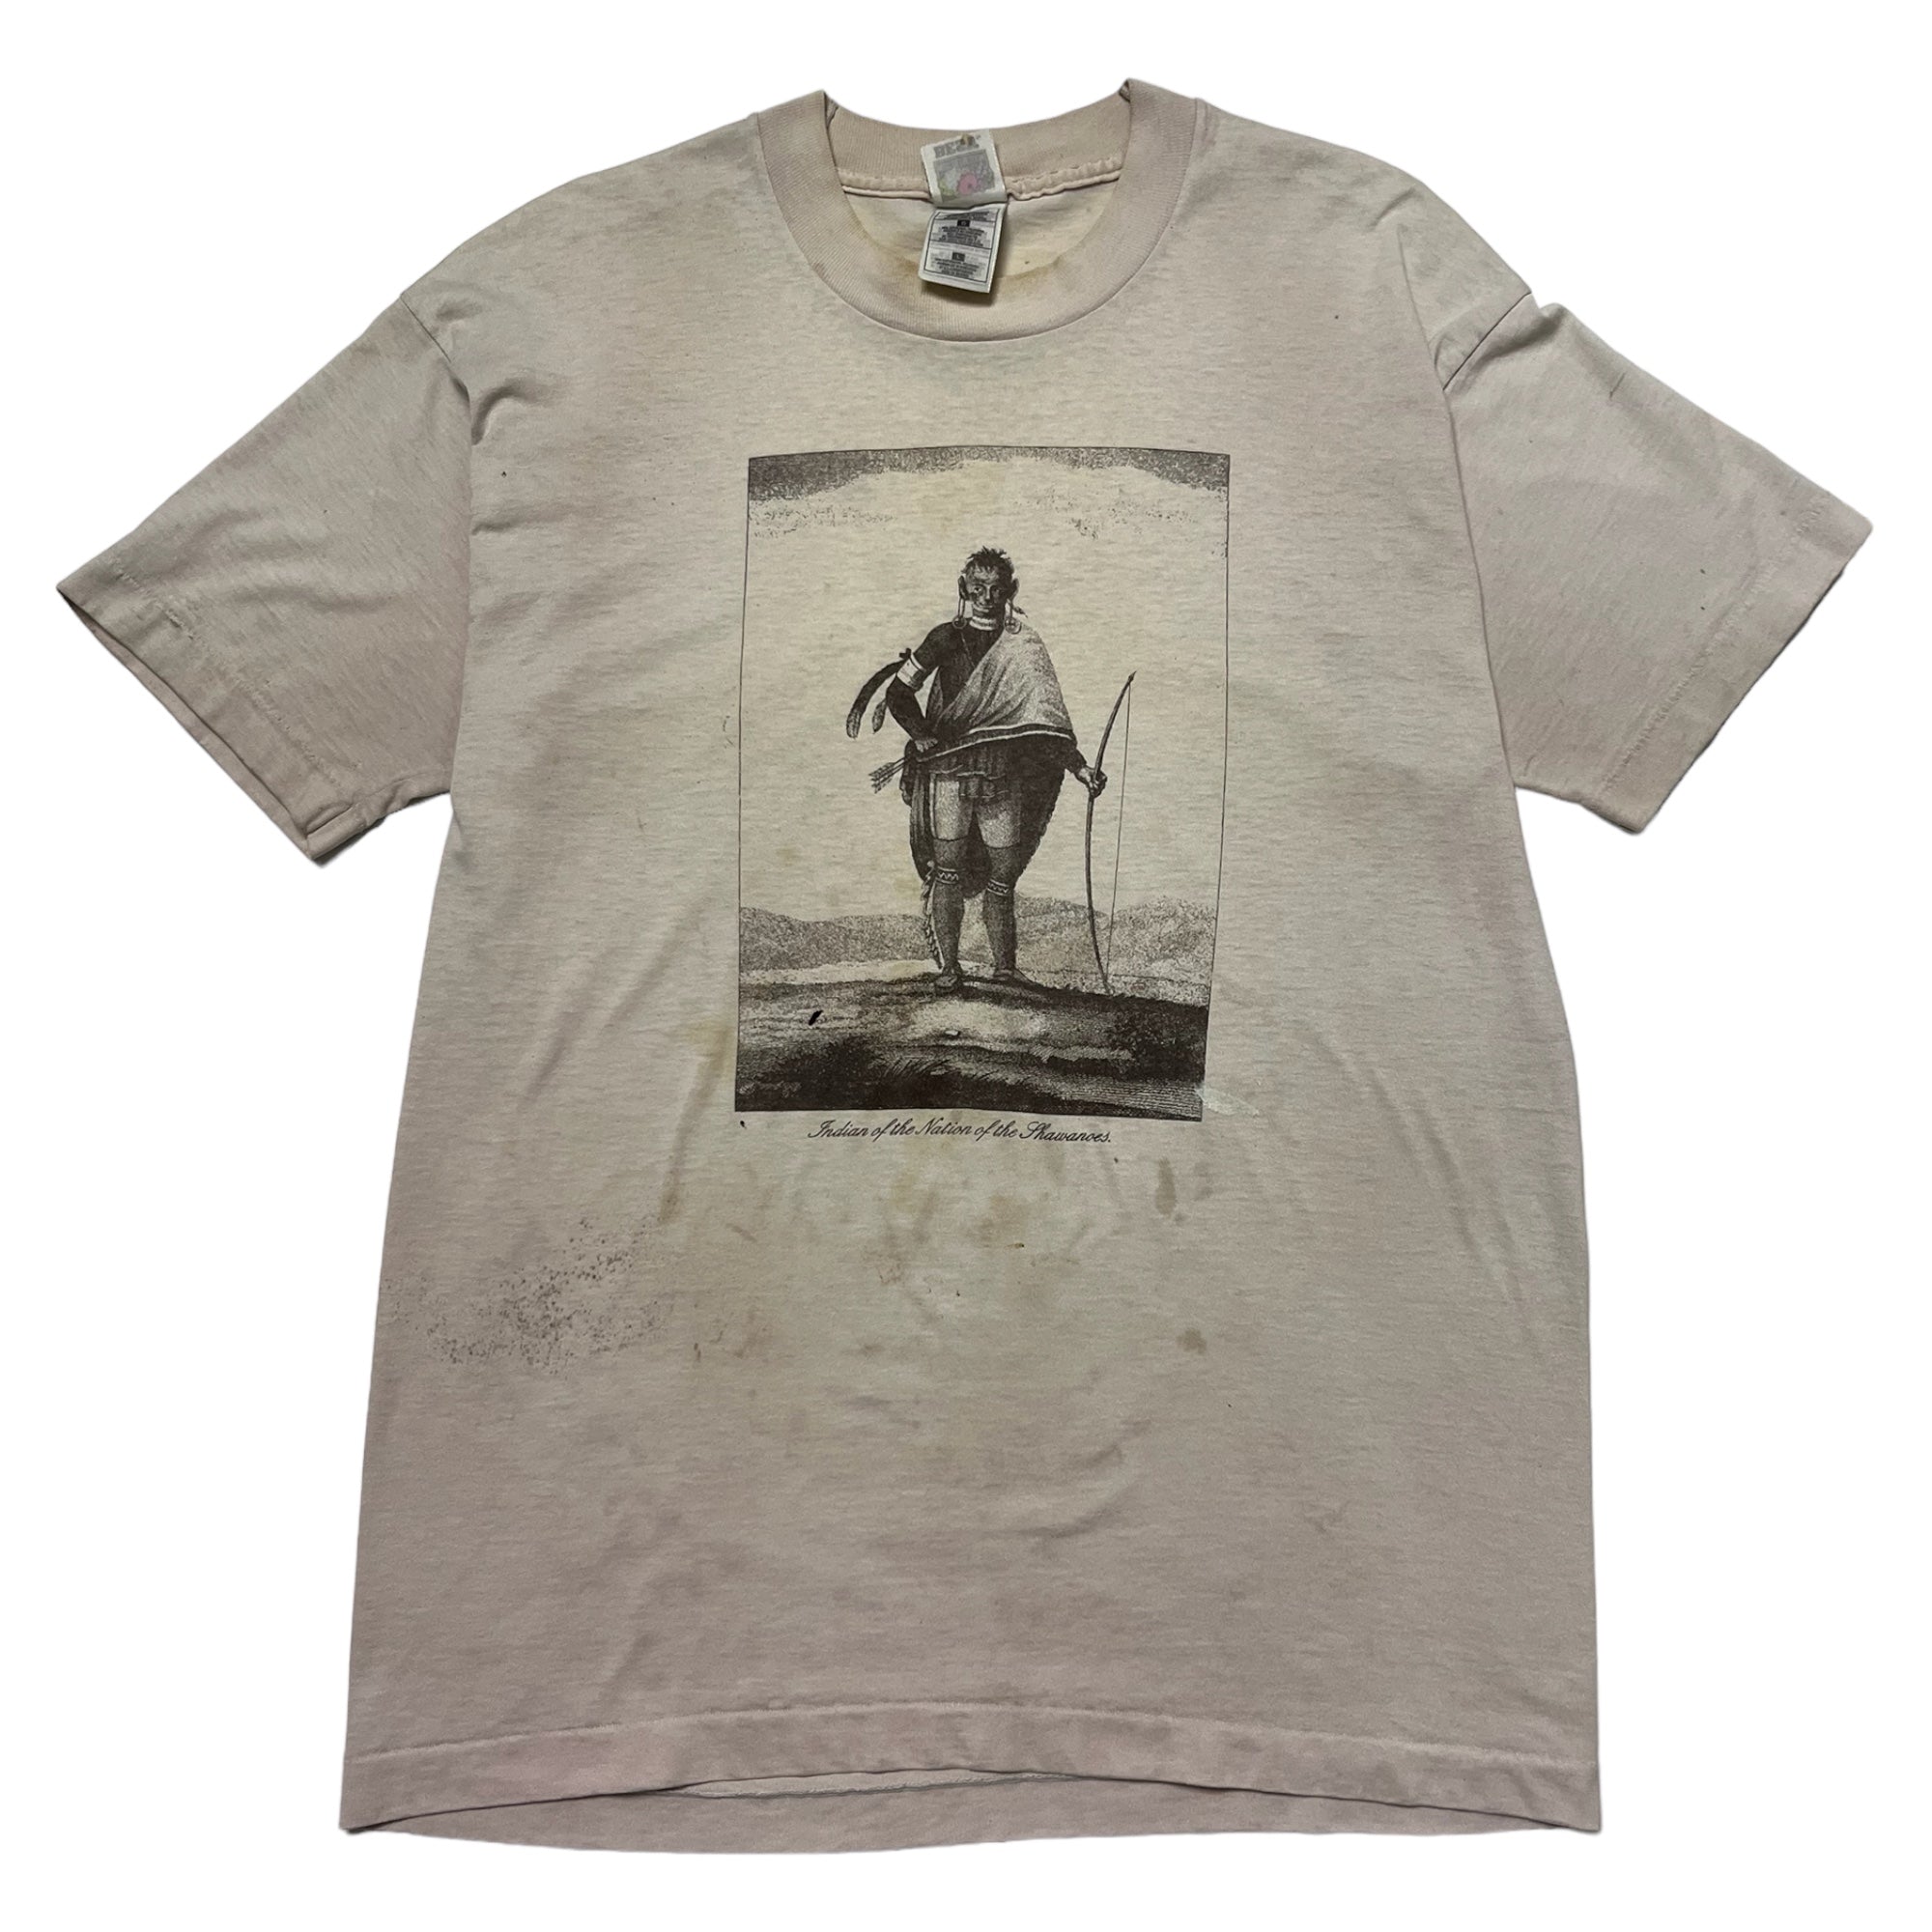 ‘90s Distressed ‘Shawanoes’ Native American T-Shirt - Off-White/Sand - L/XL